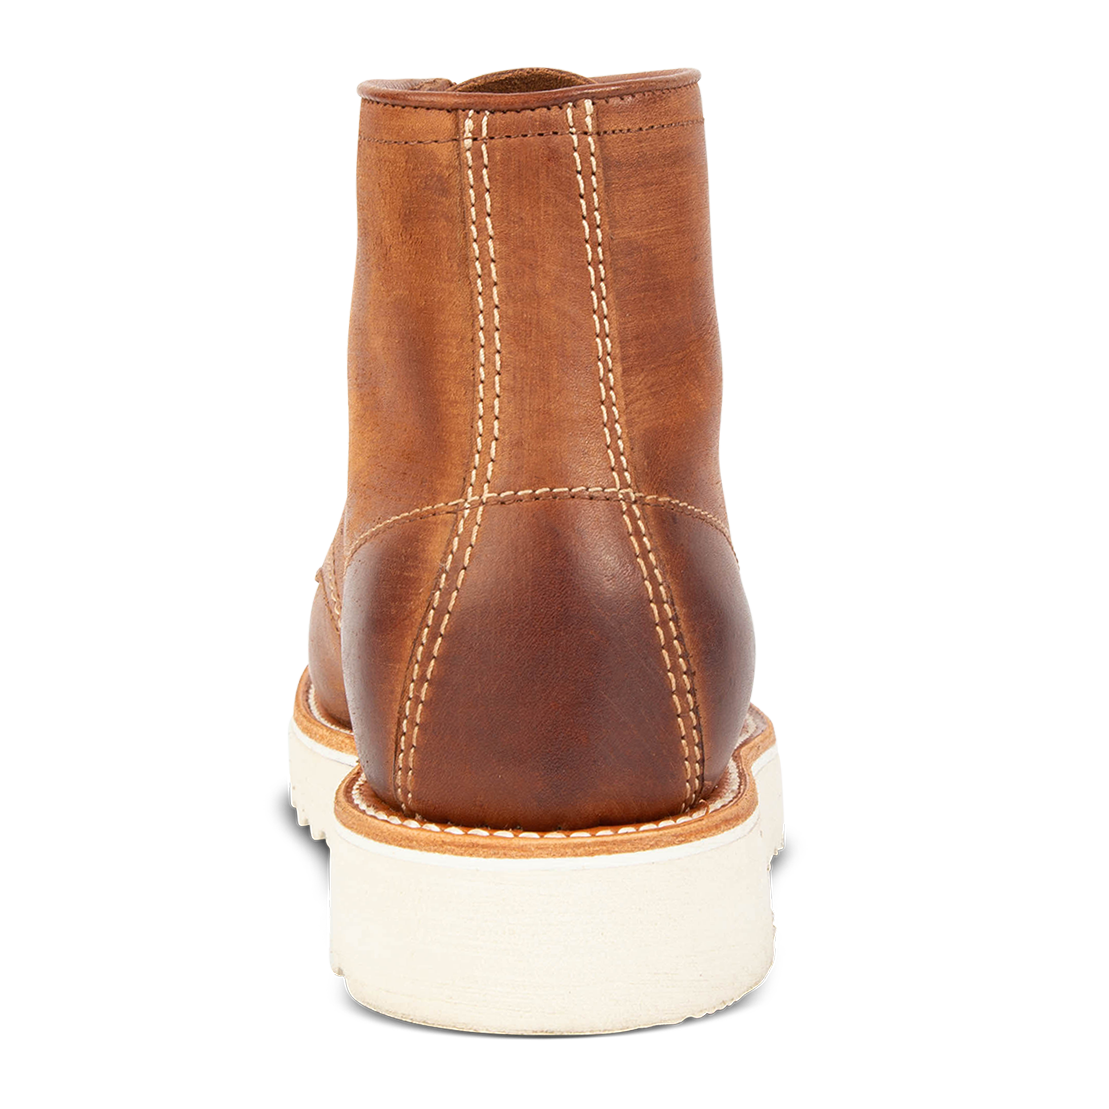 Back view showing stitch detailing and contrasting soft sole on FREEBIRD men's Carbon cognac shoe